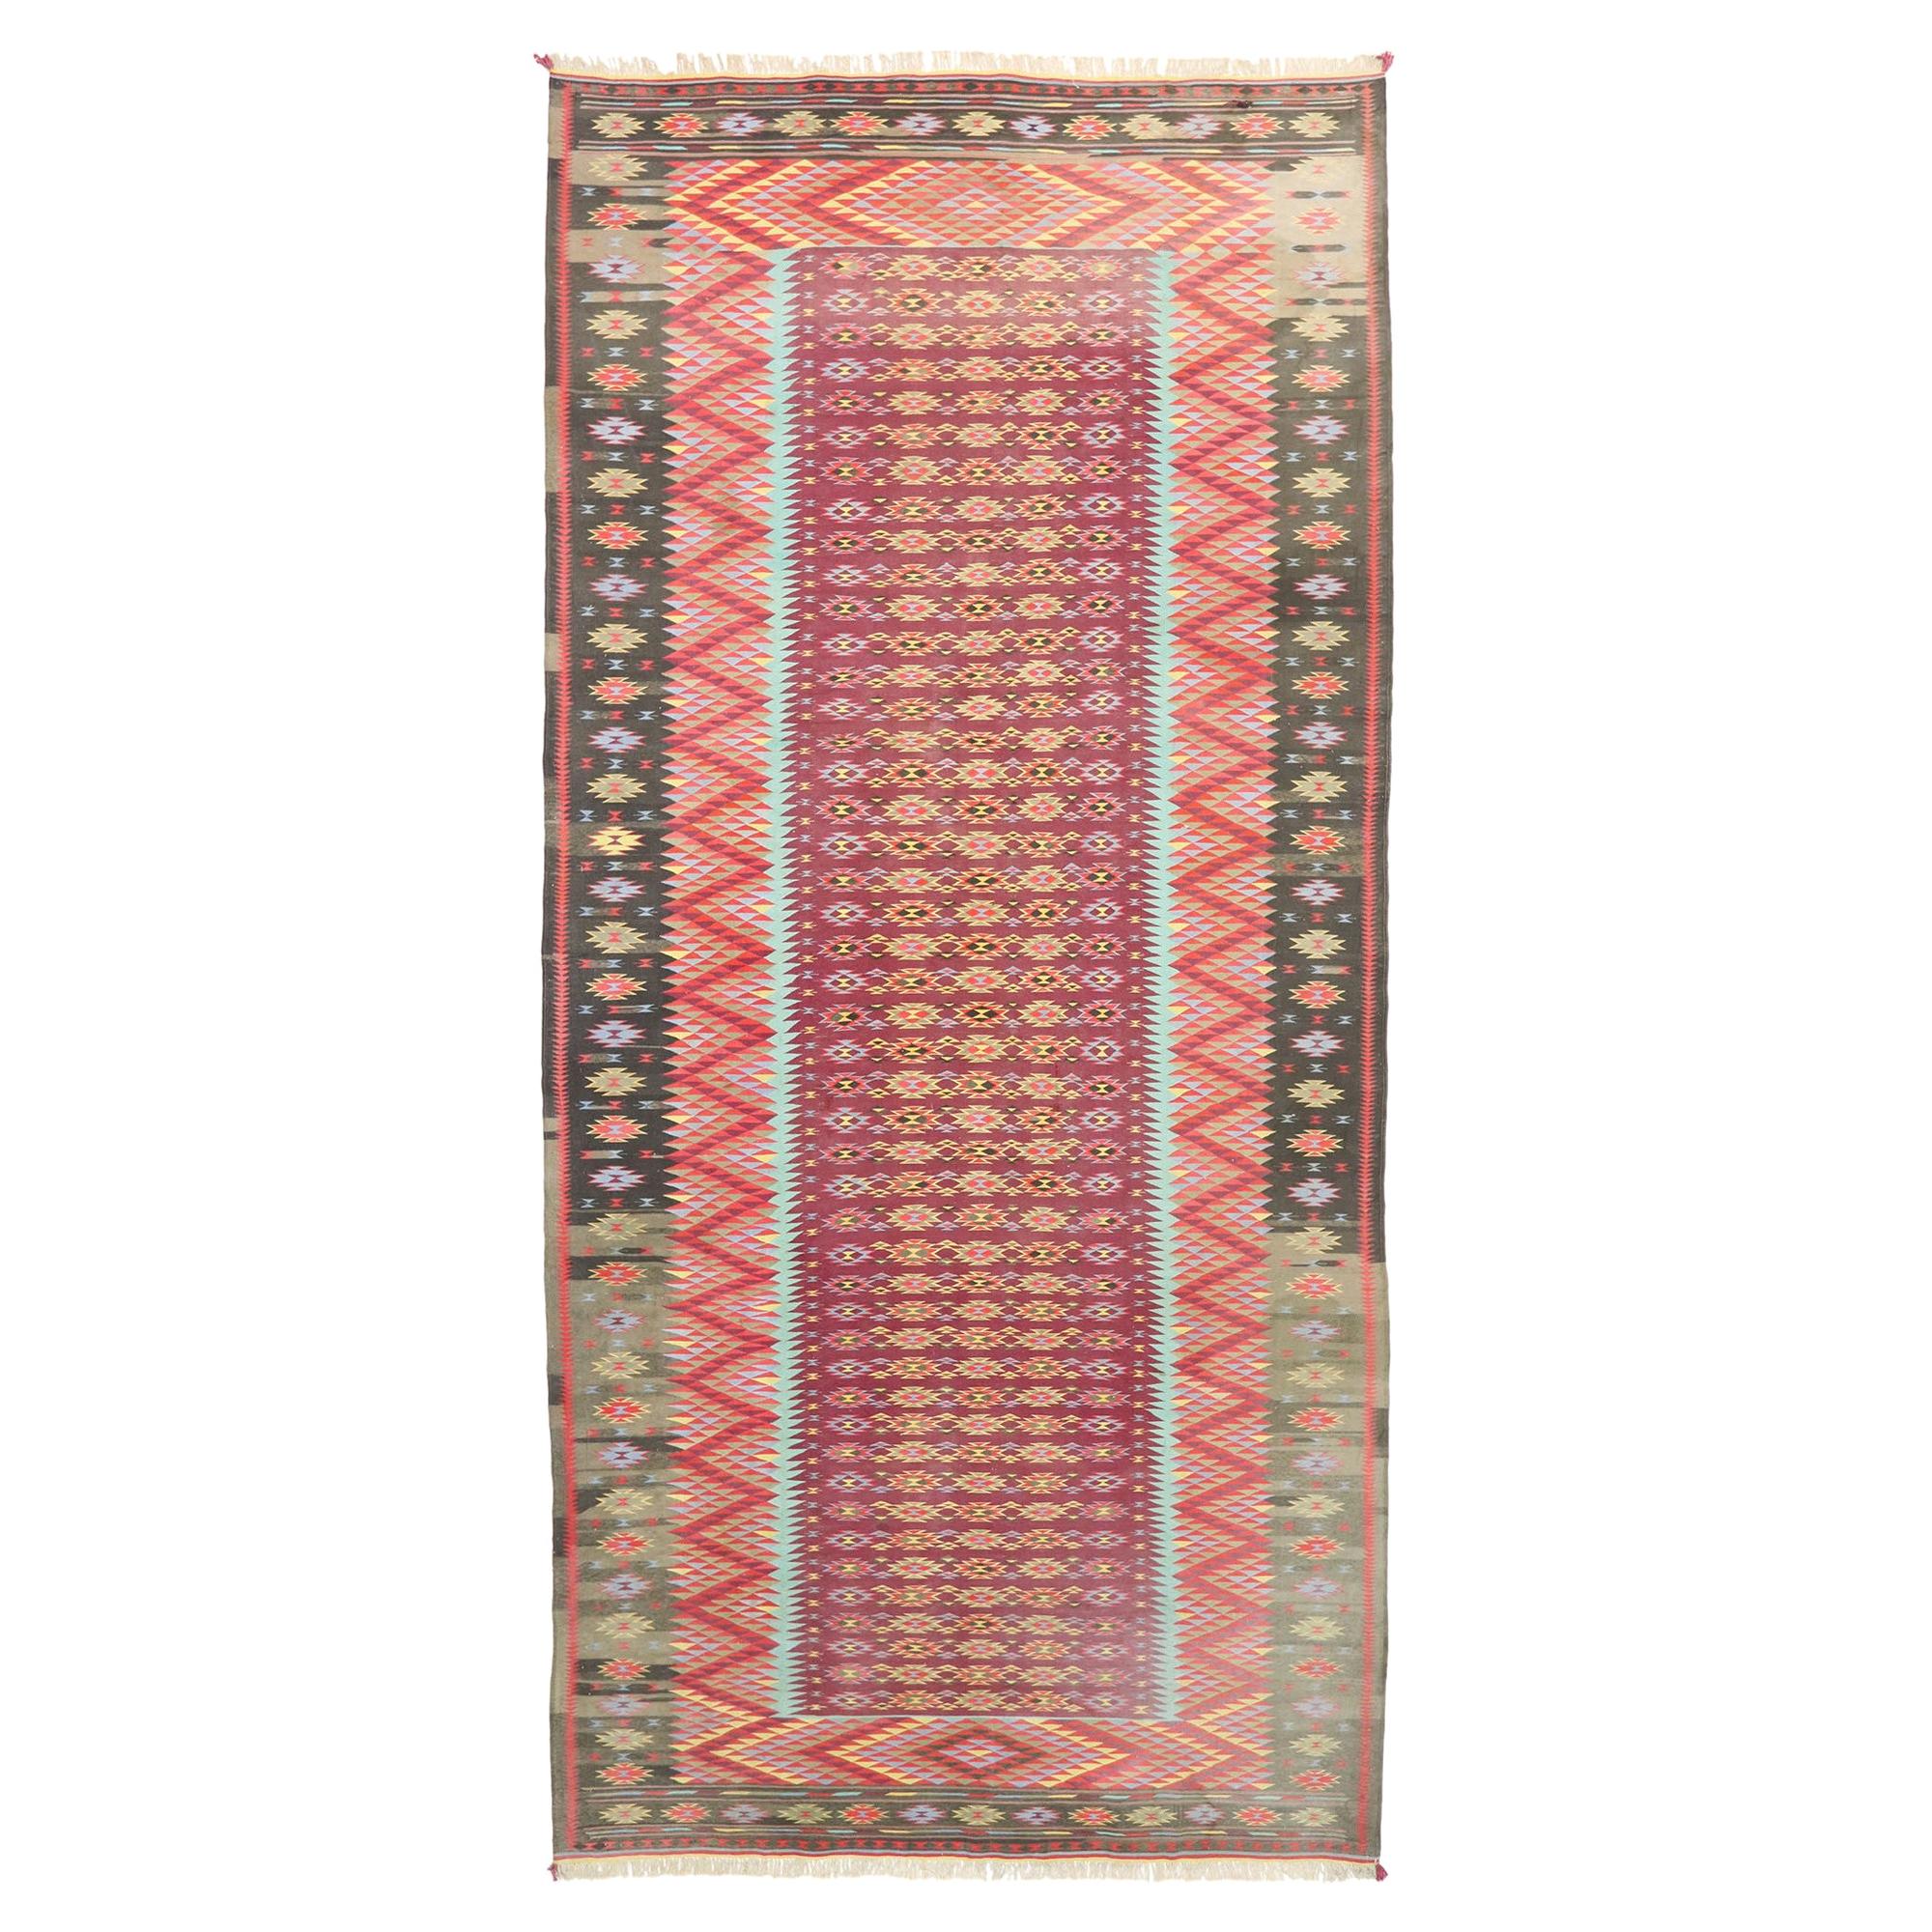 Vintage Indian Flat-Weave Dhurrie Room Size Kilim Rug with Southwestern Style